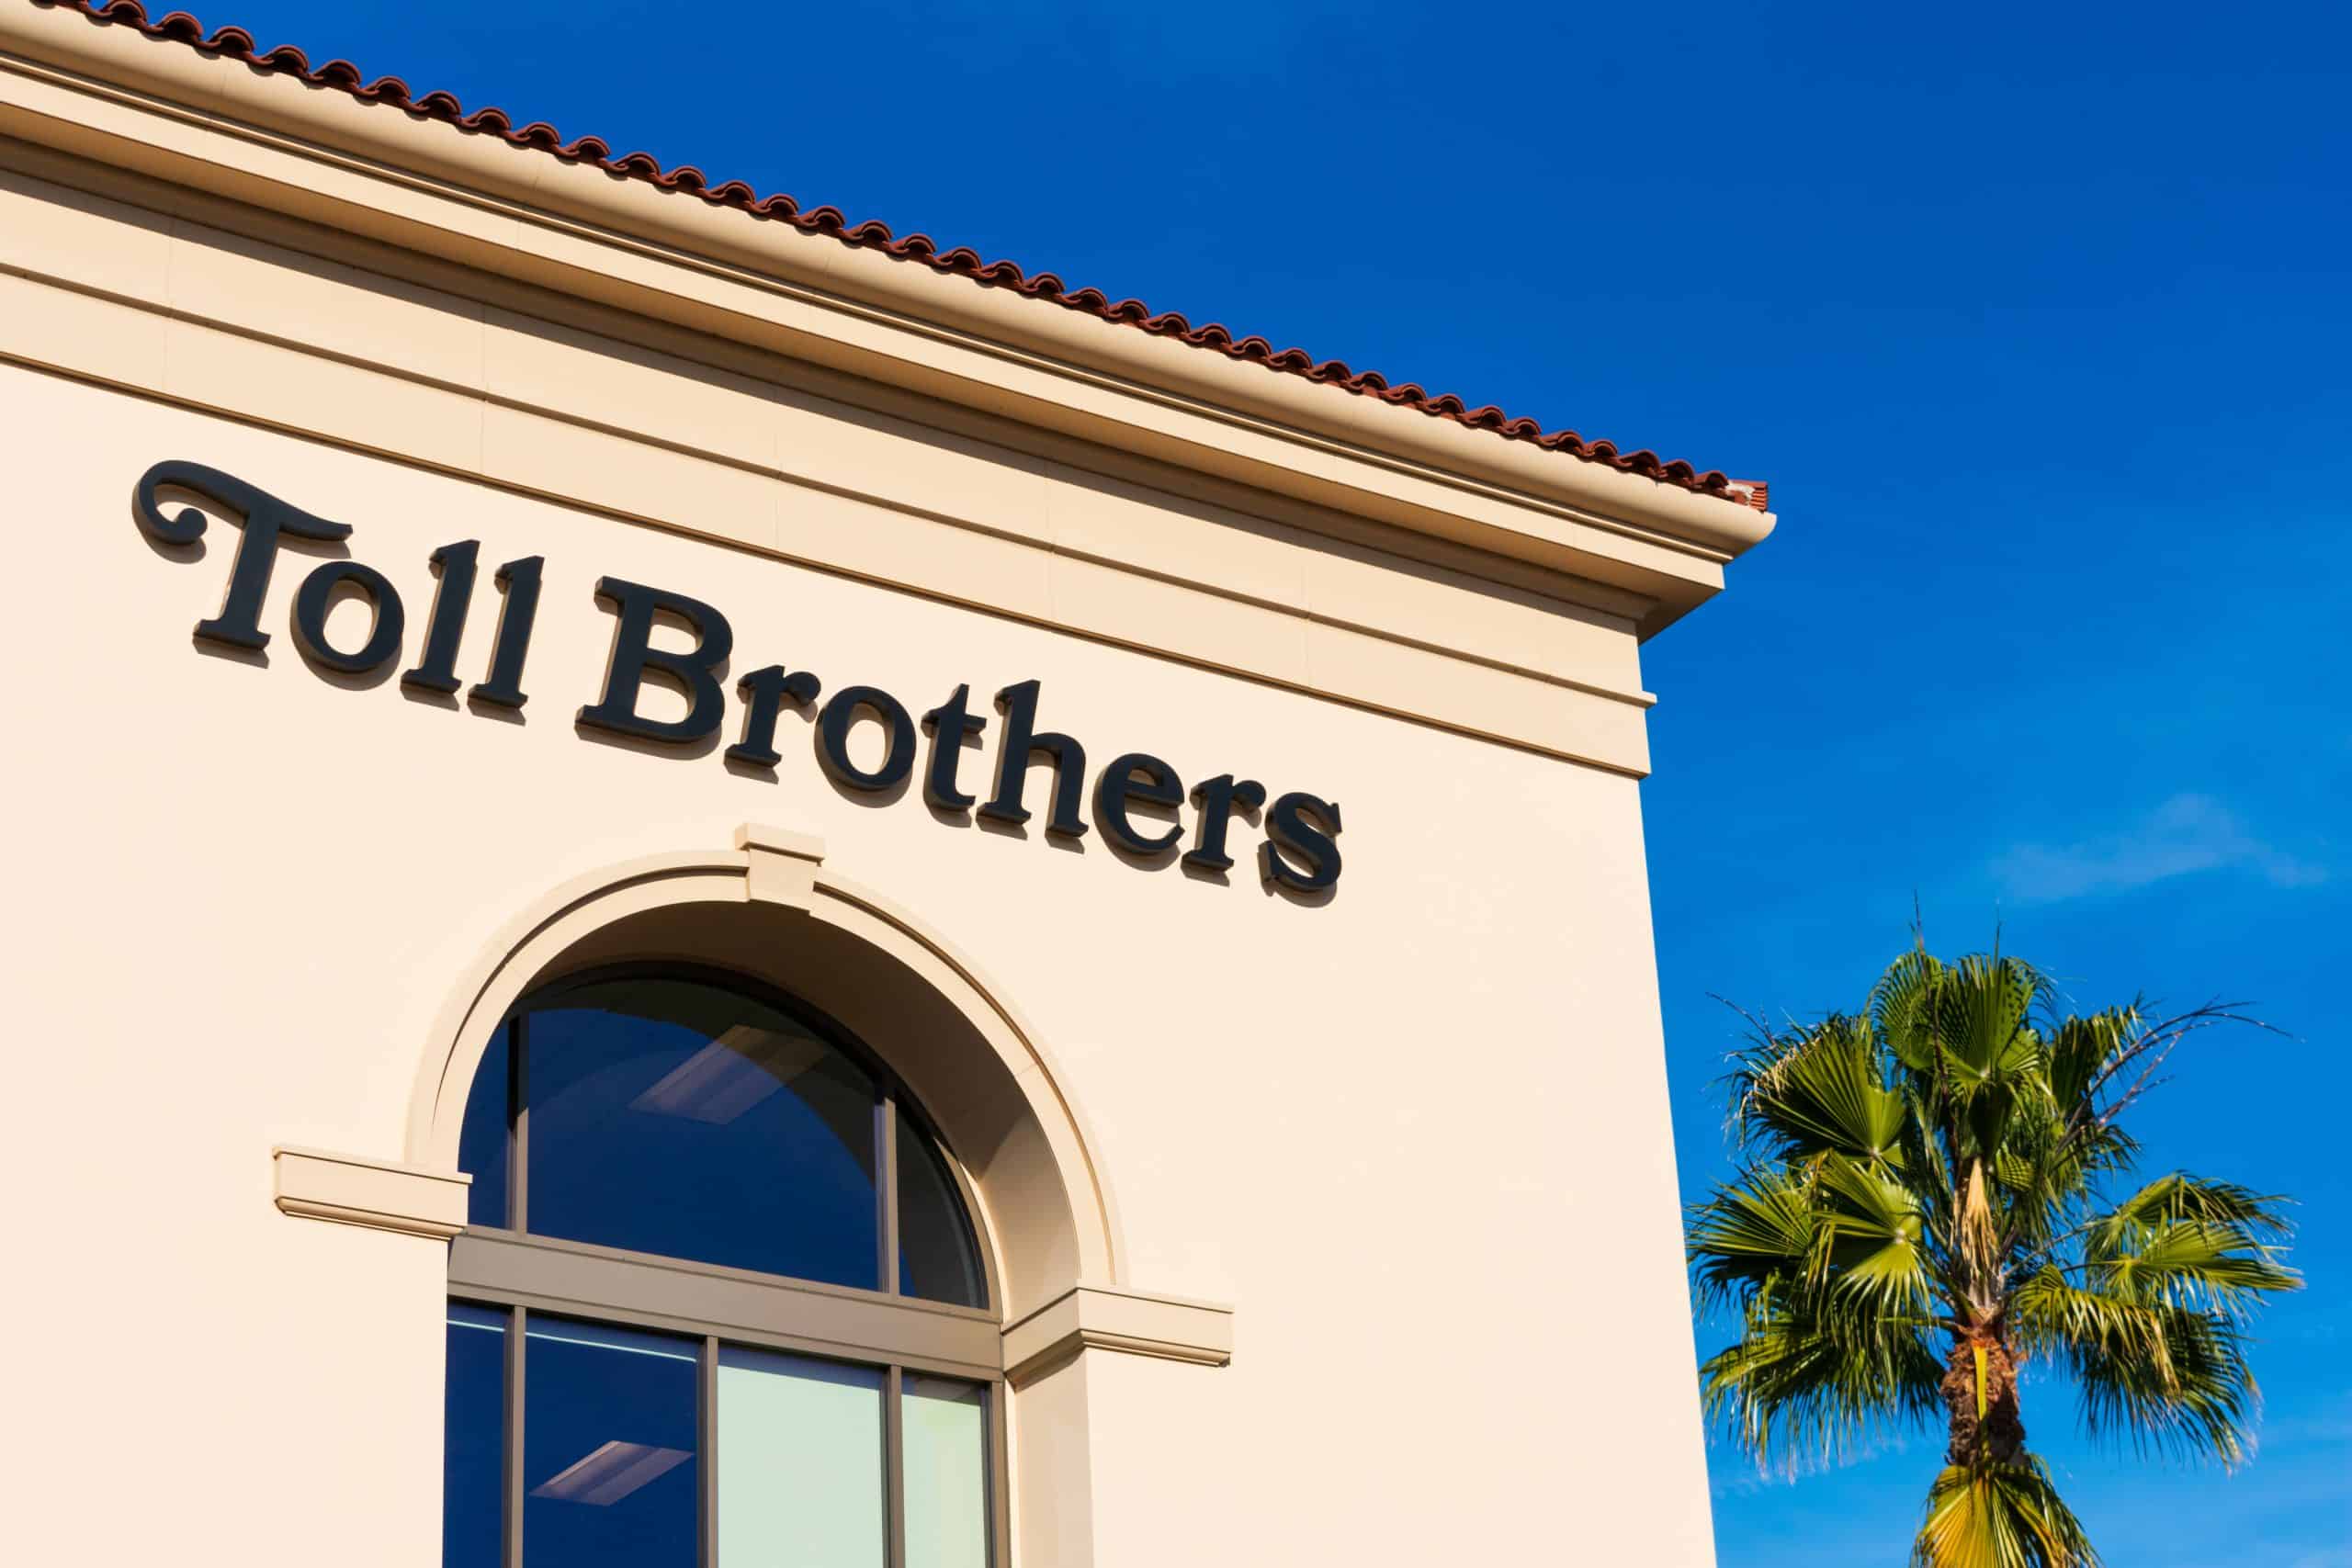 GIS Mapping Software Case Study: Toll Brothers